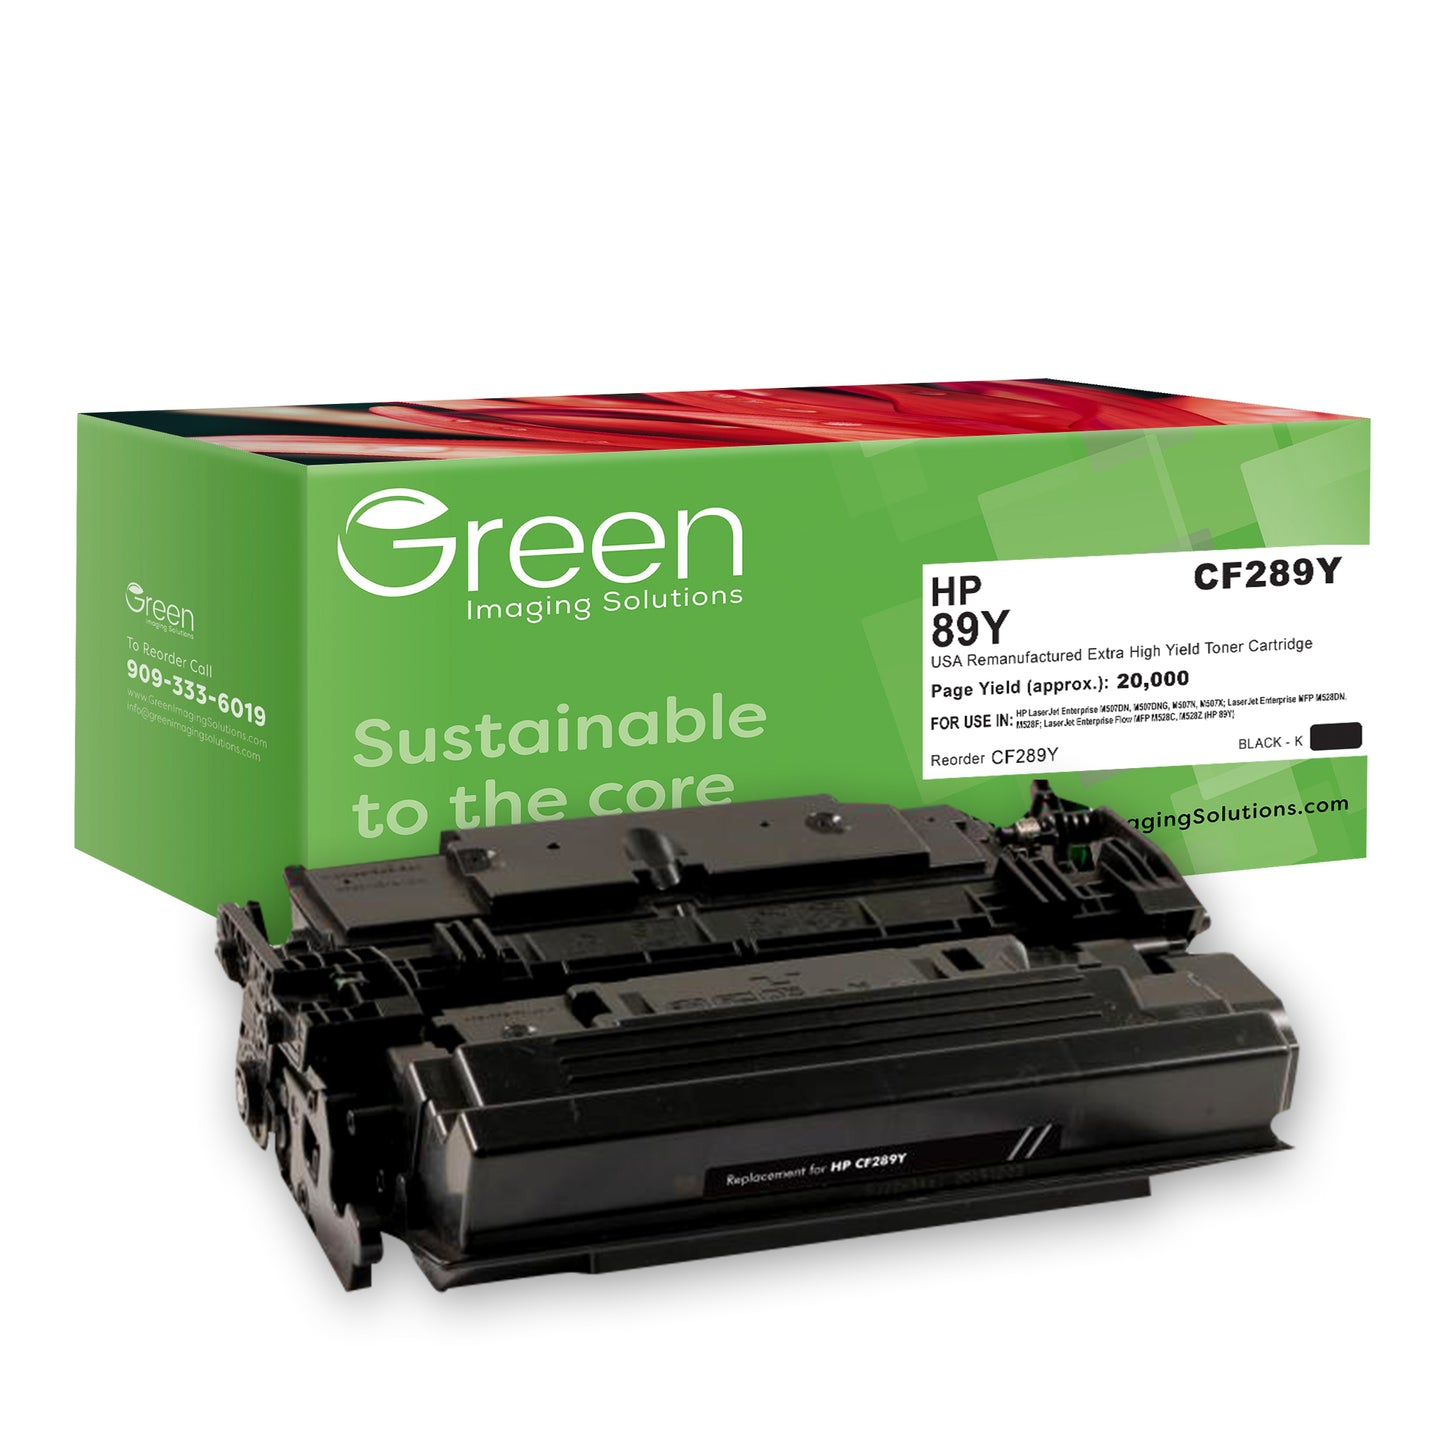 GIS USA Remanufactured Extra High Yield Toner Cartridge for HP CF289Y (HP 89Y)